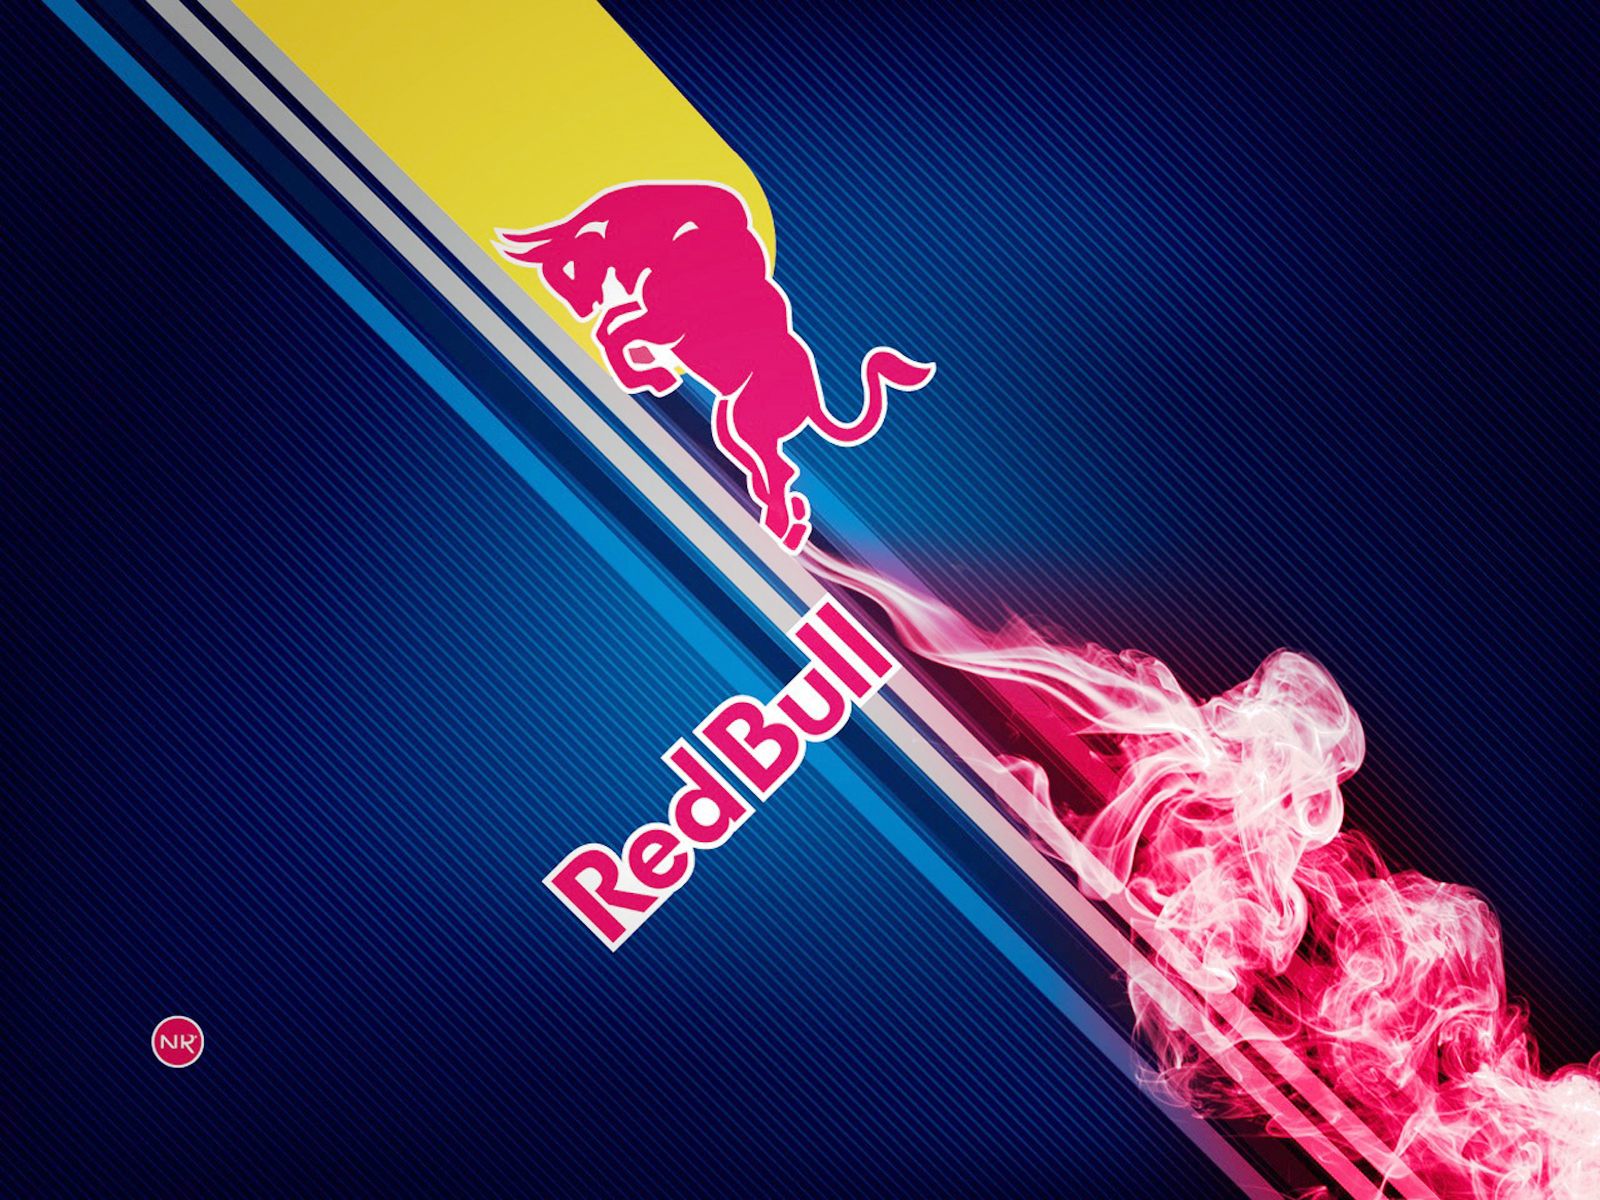 Red Bull Logo HD Backgrounds 